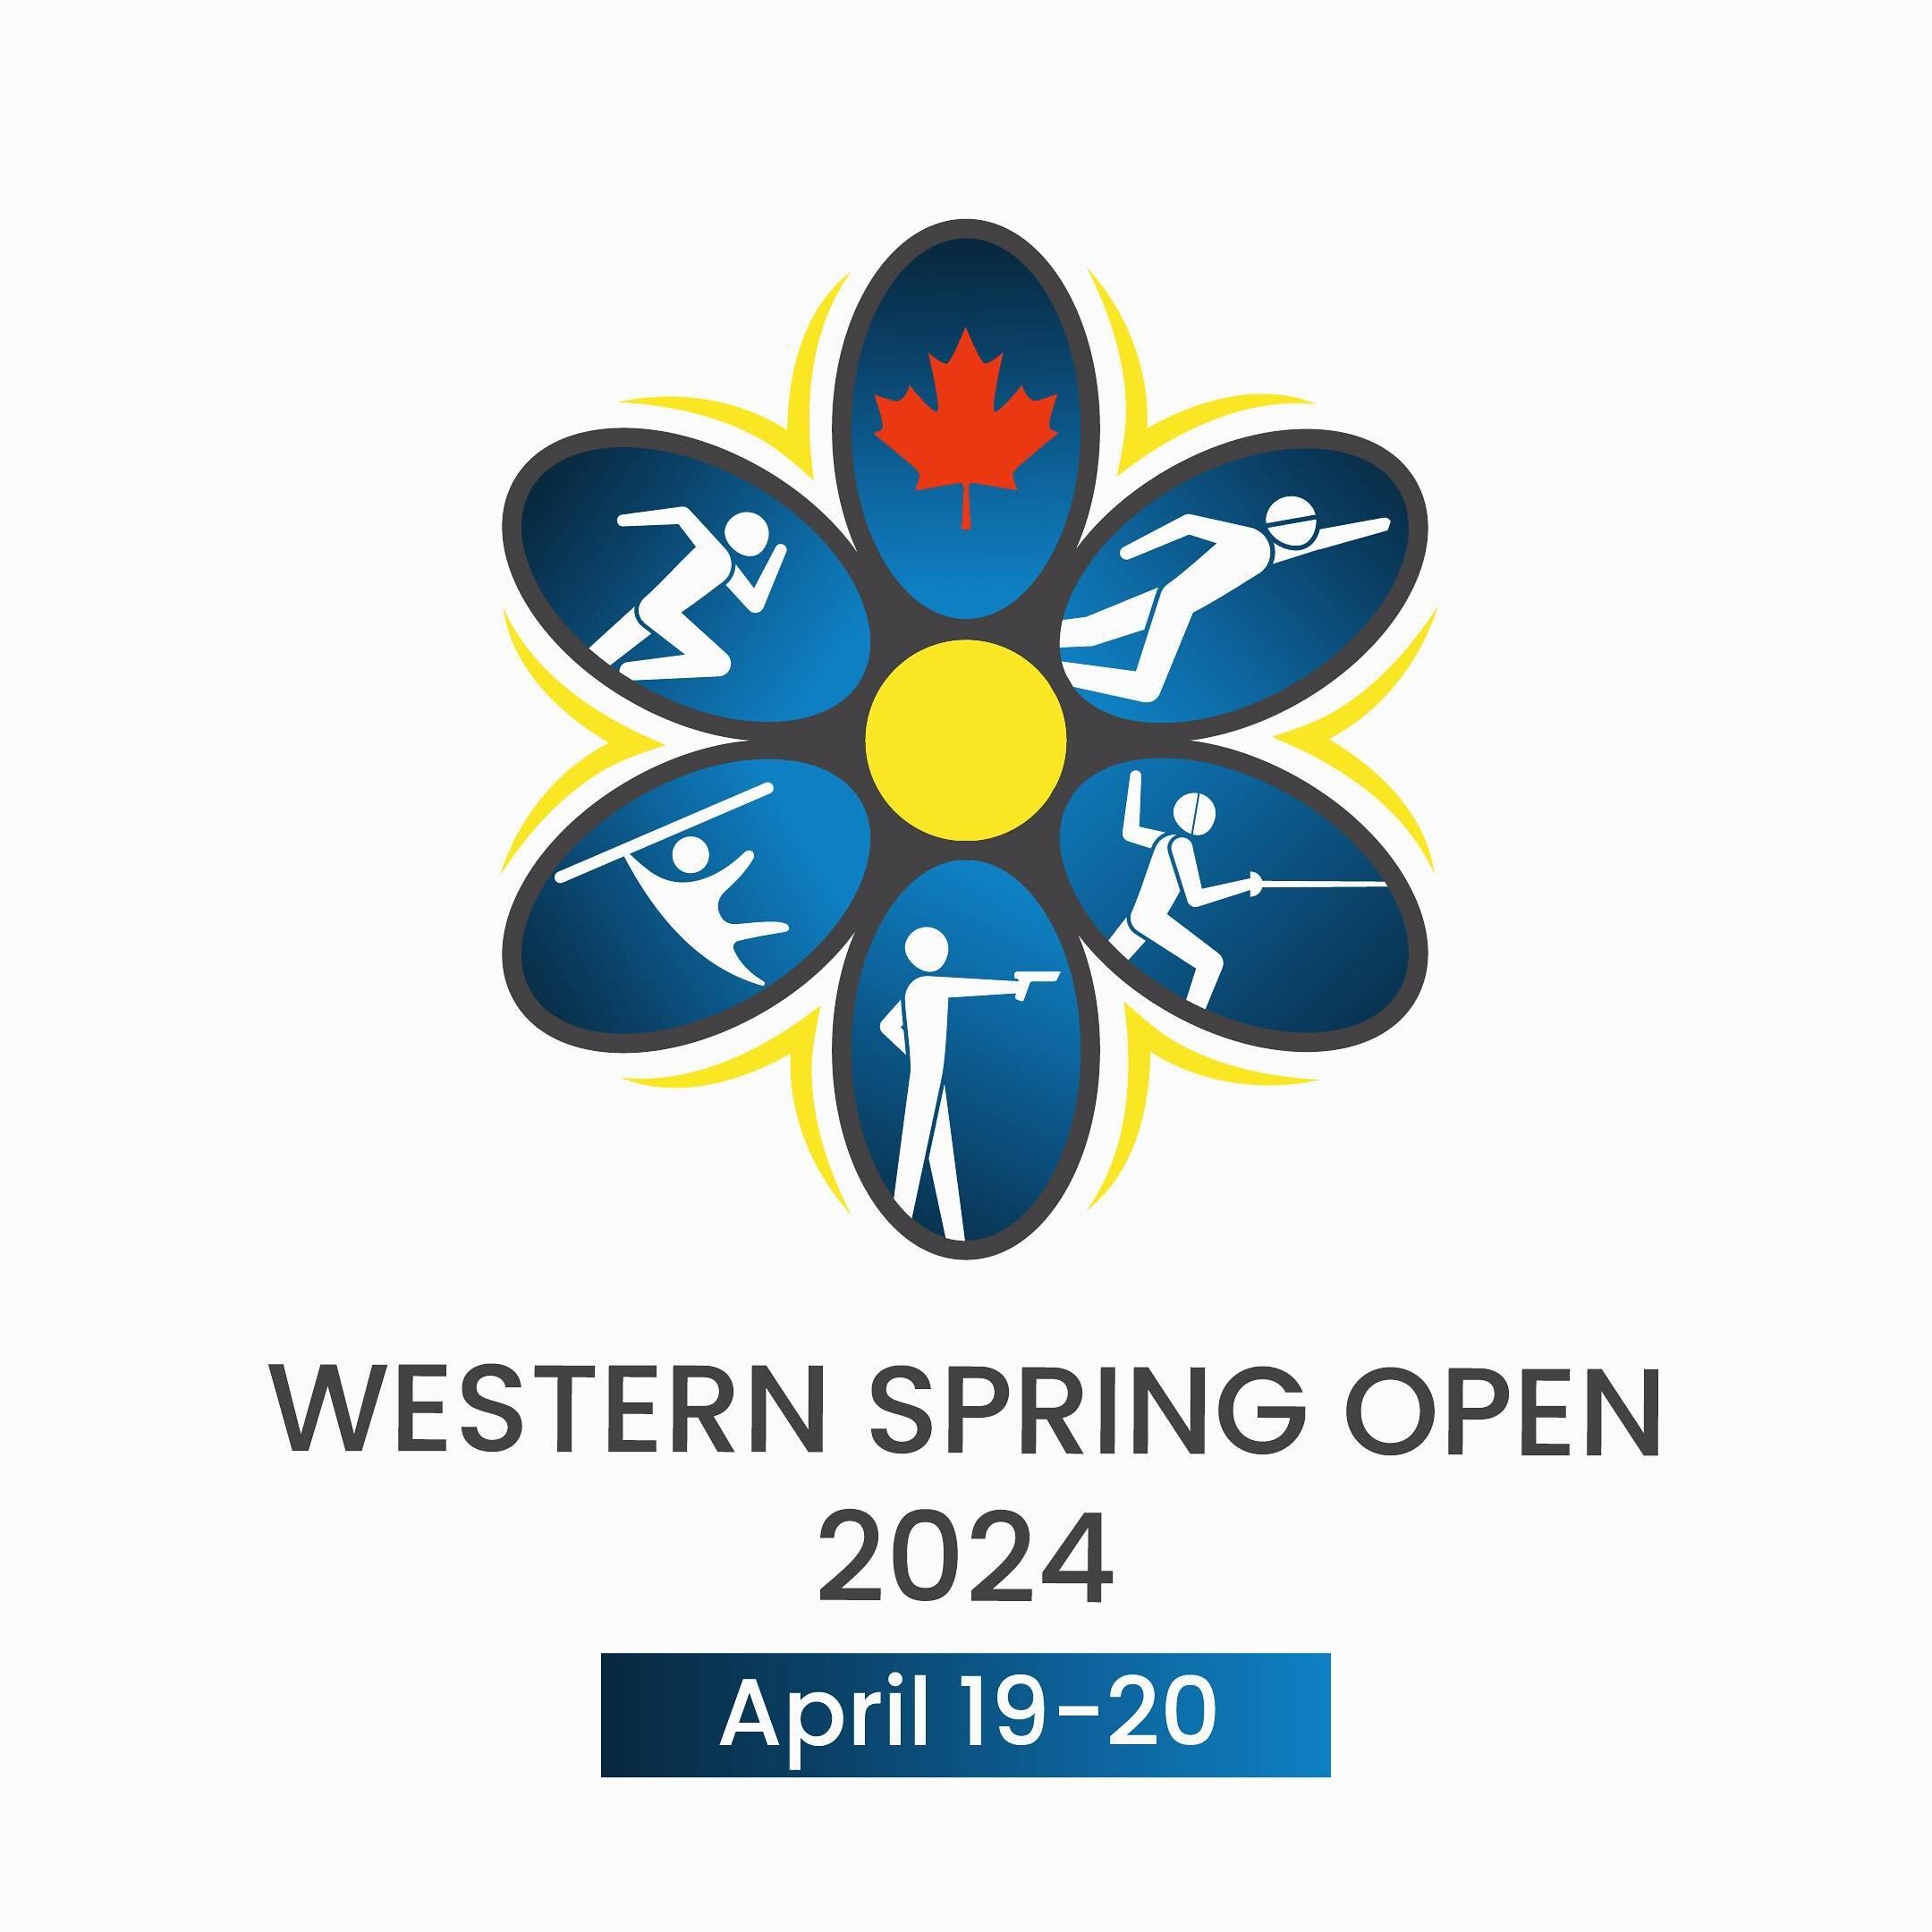 🤺 🏊&zwj;♀️ 🏊🏽&zwj;♂️ 🏃🏼&zwj;♂️ 🏃🏽&zwj;♀️ 

⏰ The WSO early 🐦 deadline is tonight (March 27).

Get your spot today, save $15 and pick up a competition 👕!

Copy + Paste bit.ly/WSO2024 🎟️ 

@pentathlon_alberta @pentathloncan @usapentathlonmul